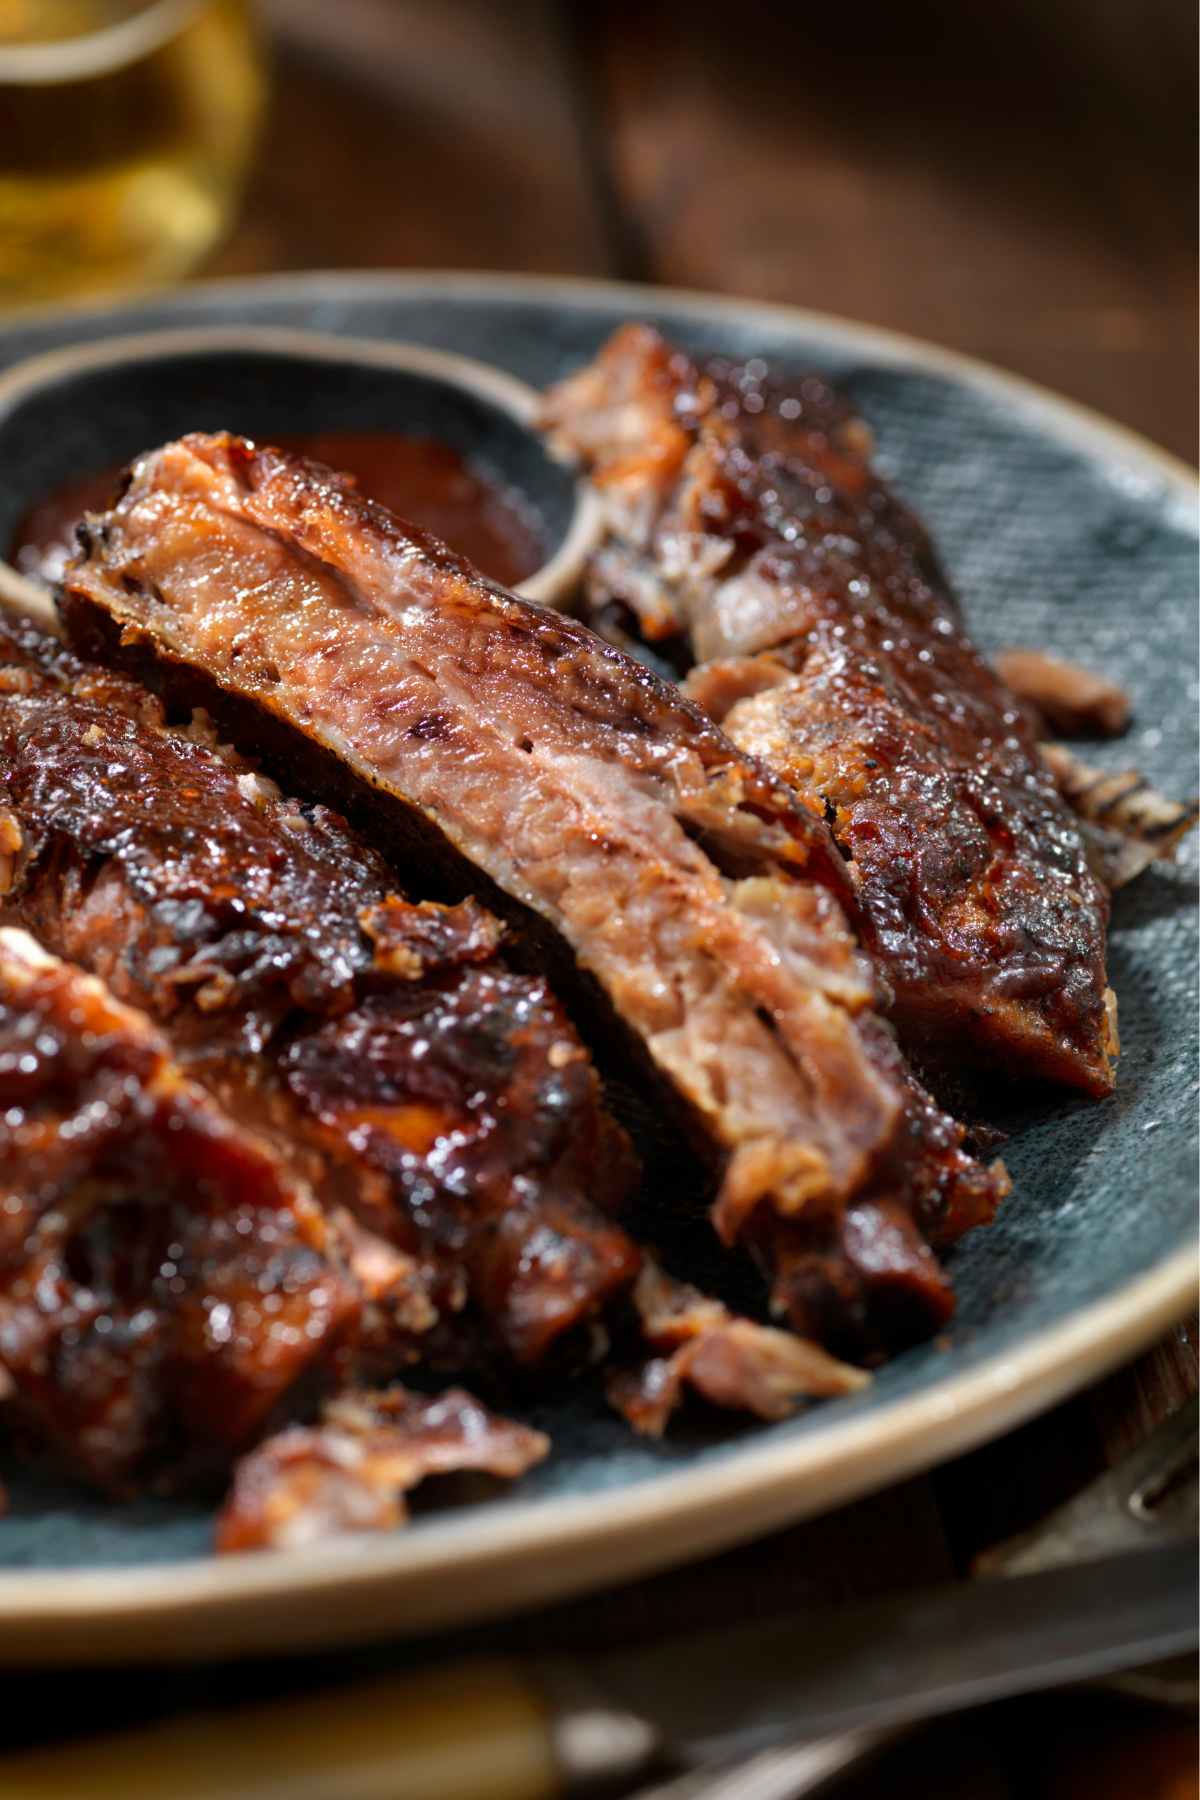 The internal temperature is the best way to ensure beef ribs are tender, juicy and full of flavor. Keep reading to find out the ideal Beef Ribs Internal Temp, plus the right technique for accurate and delicious results!